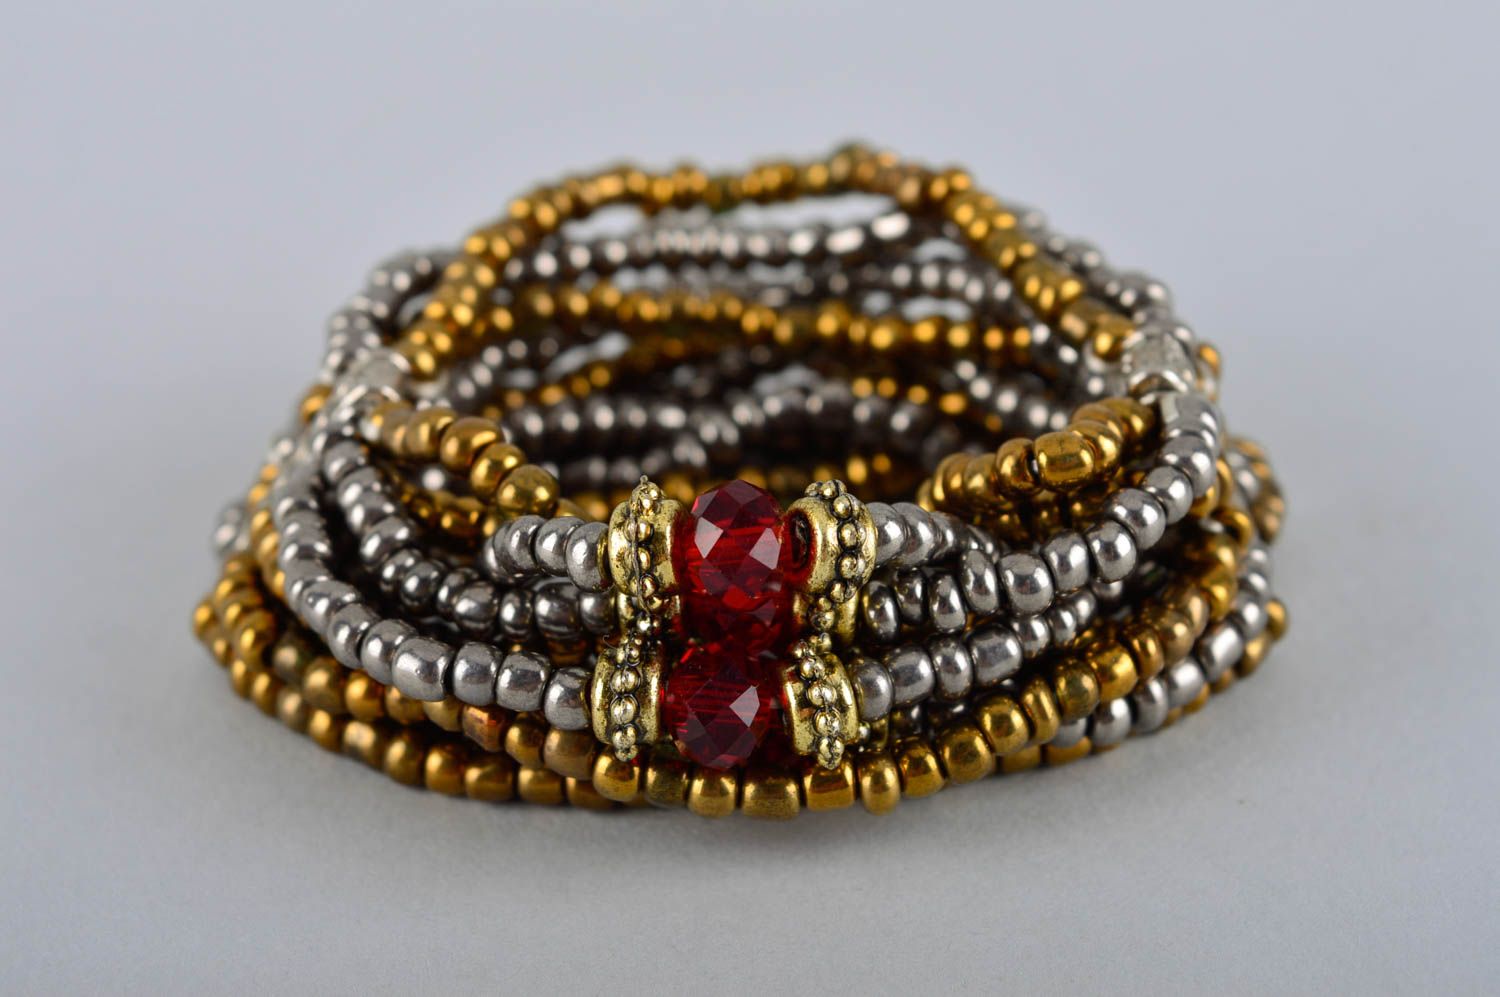 Multi-row wrist line bracelet made of silver and gold color beads for women photo 2